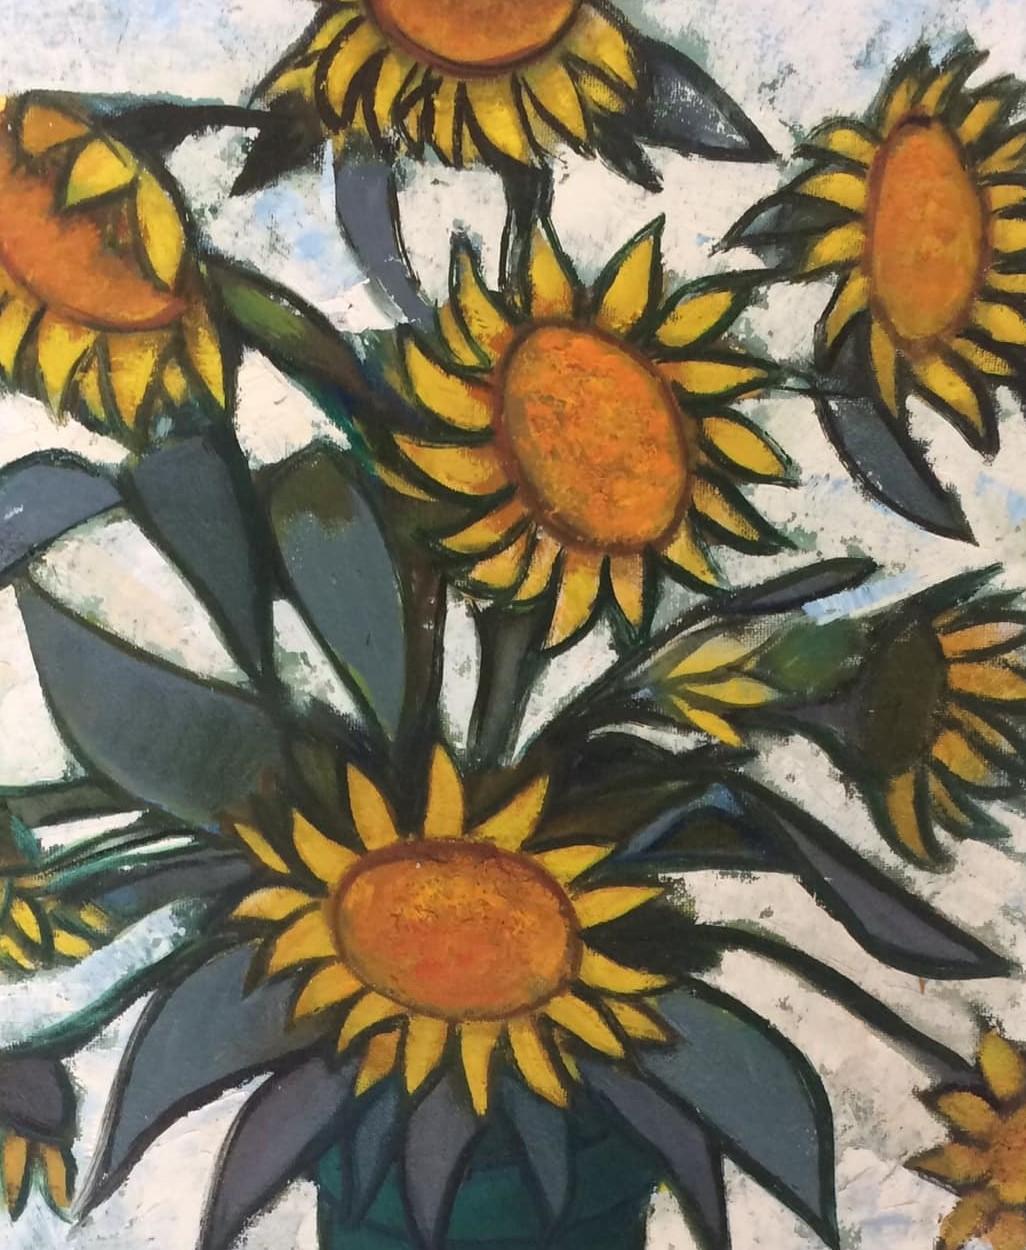 Sunflowers.  1999.  Oil on canvas. 100x81 cm - Painting by Laimdots Murnieks